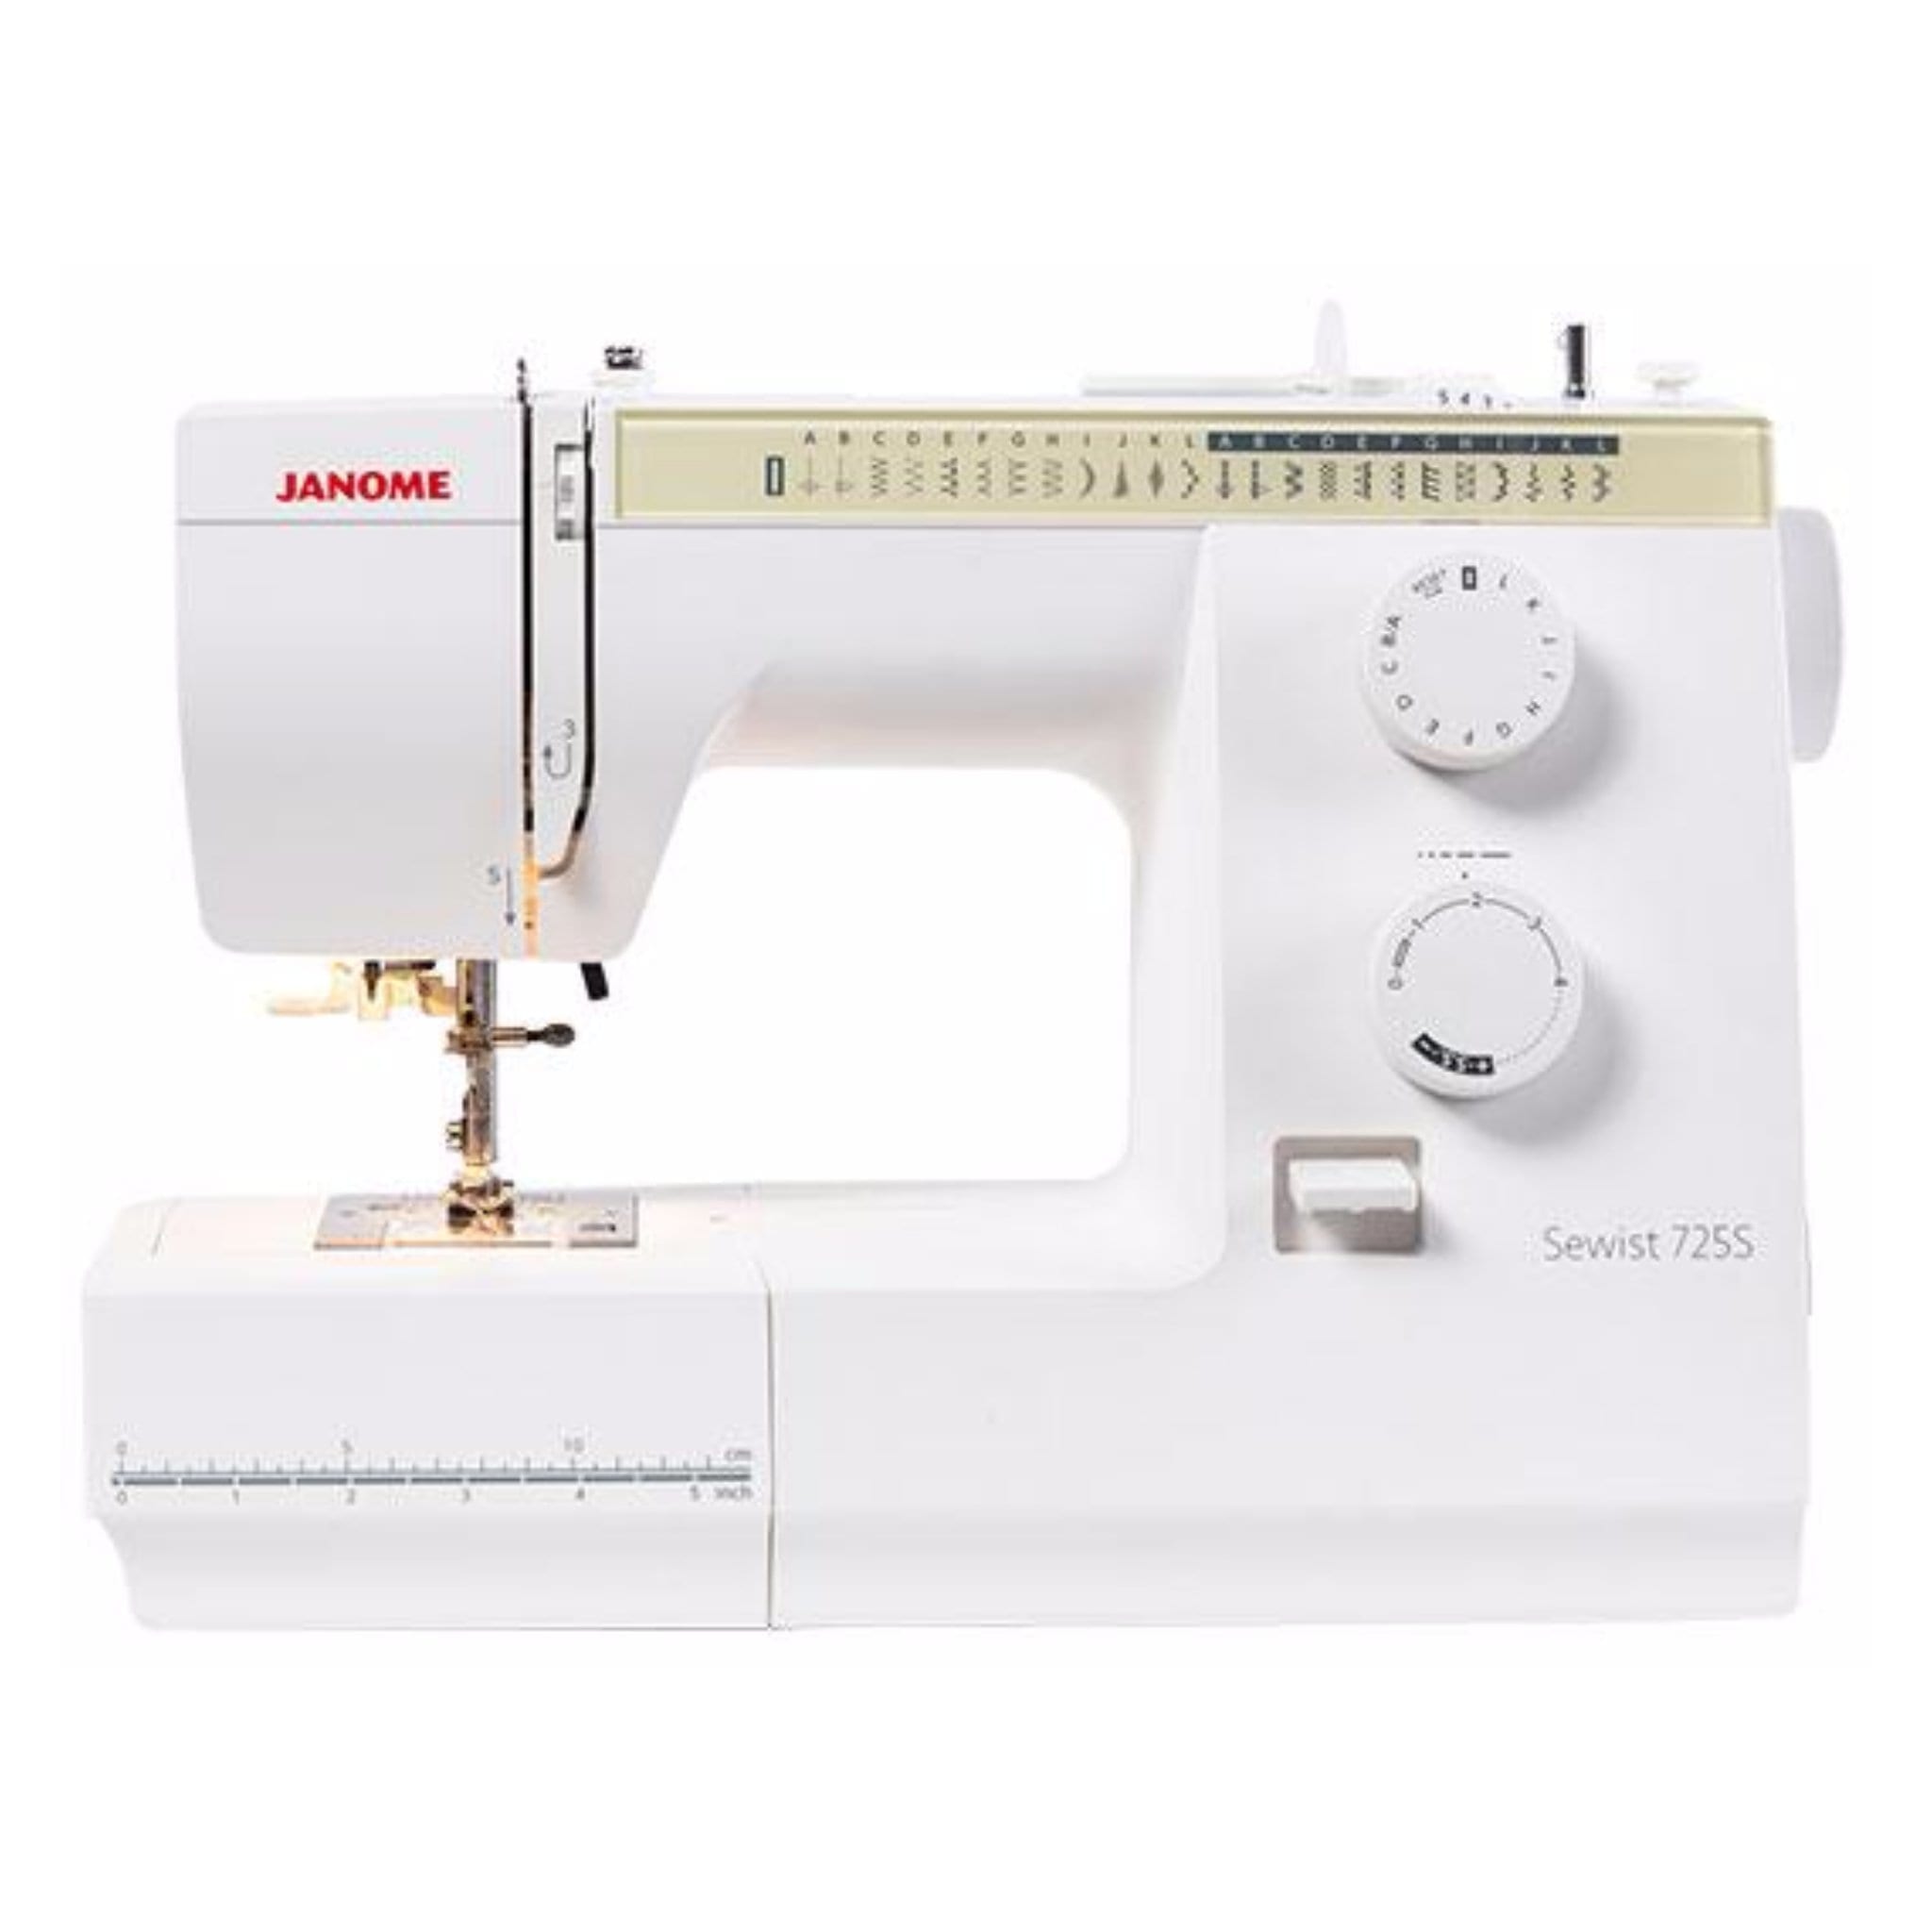 Learn to use a Sewing Machine